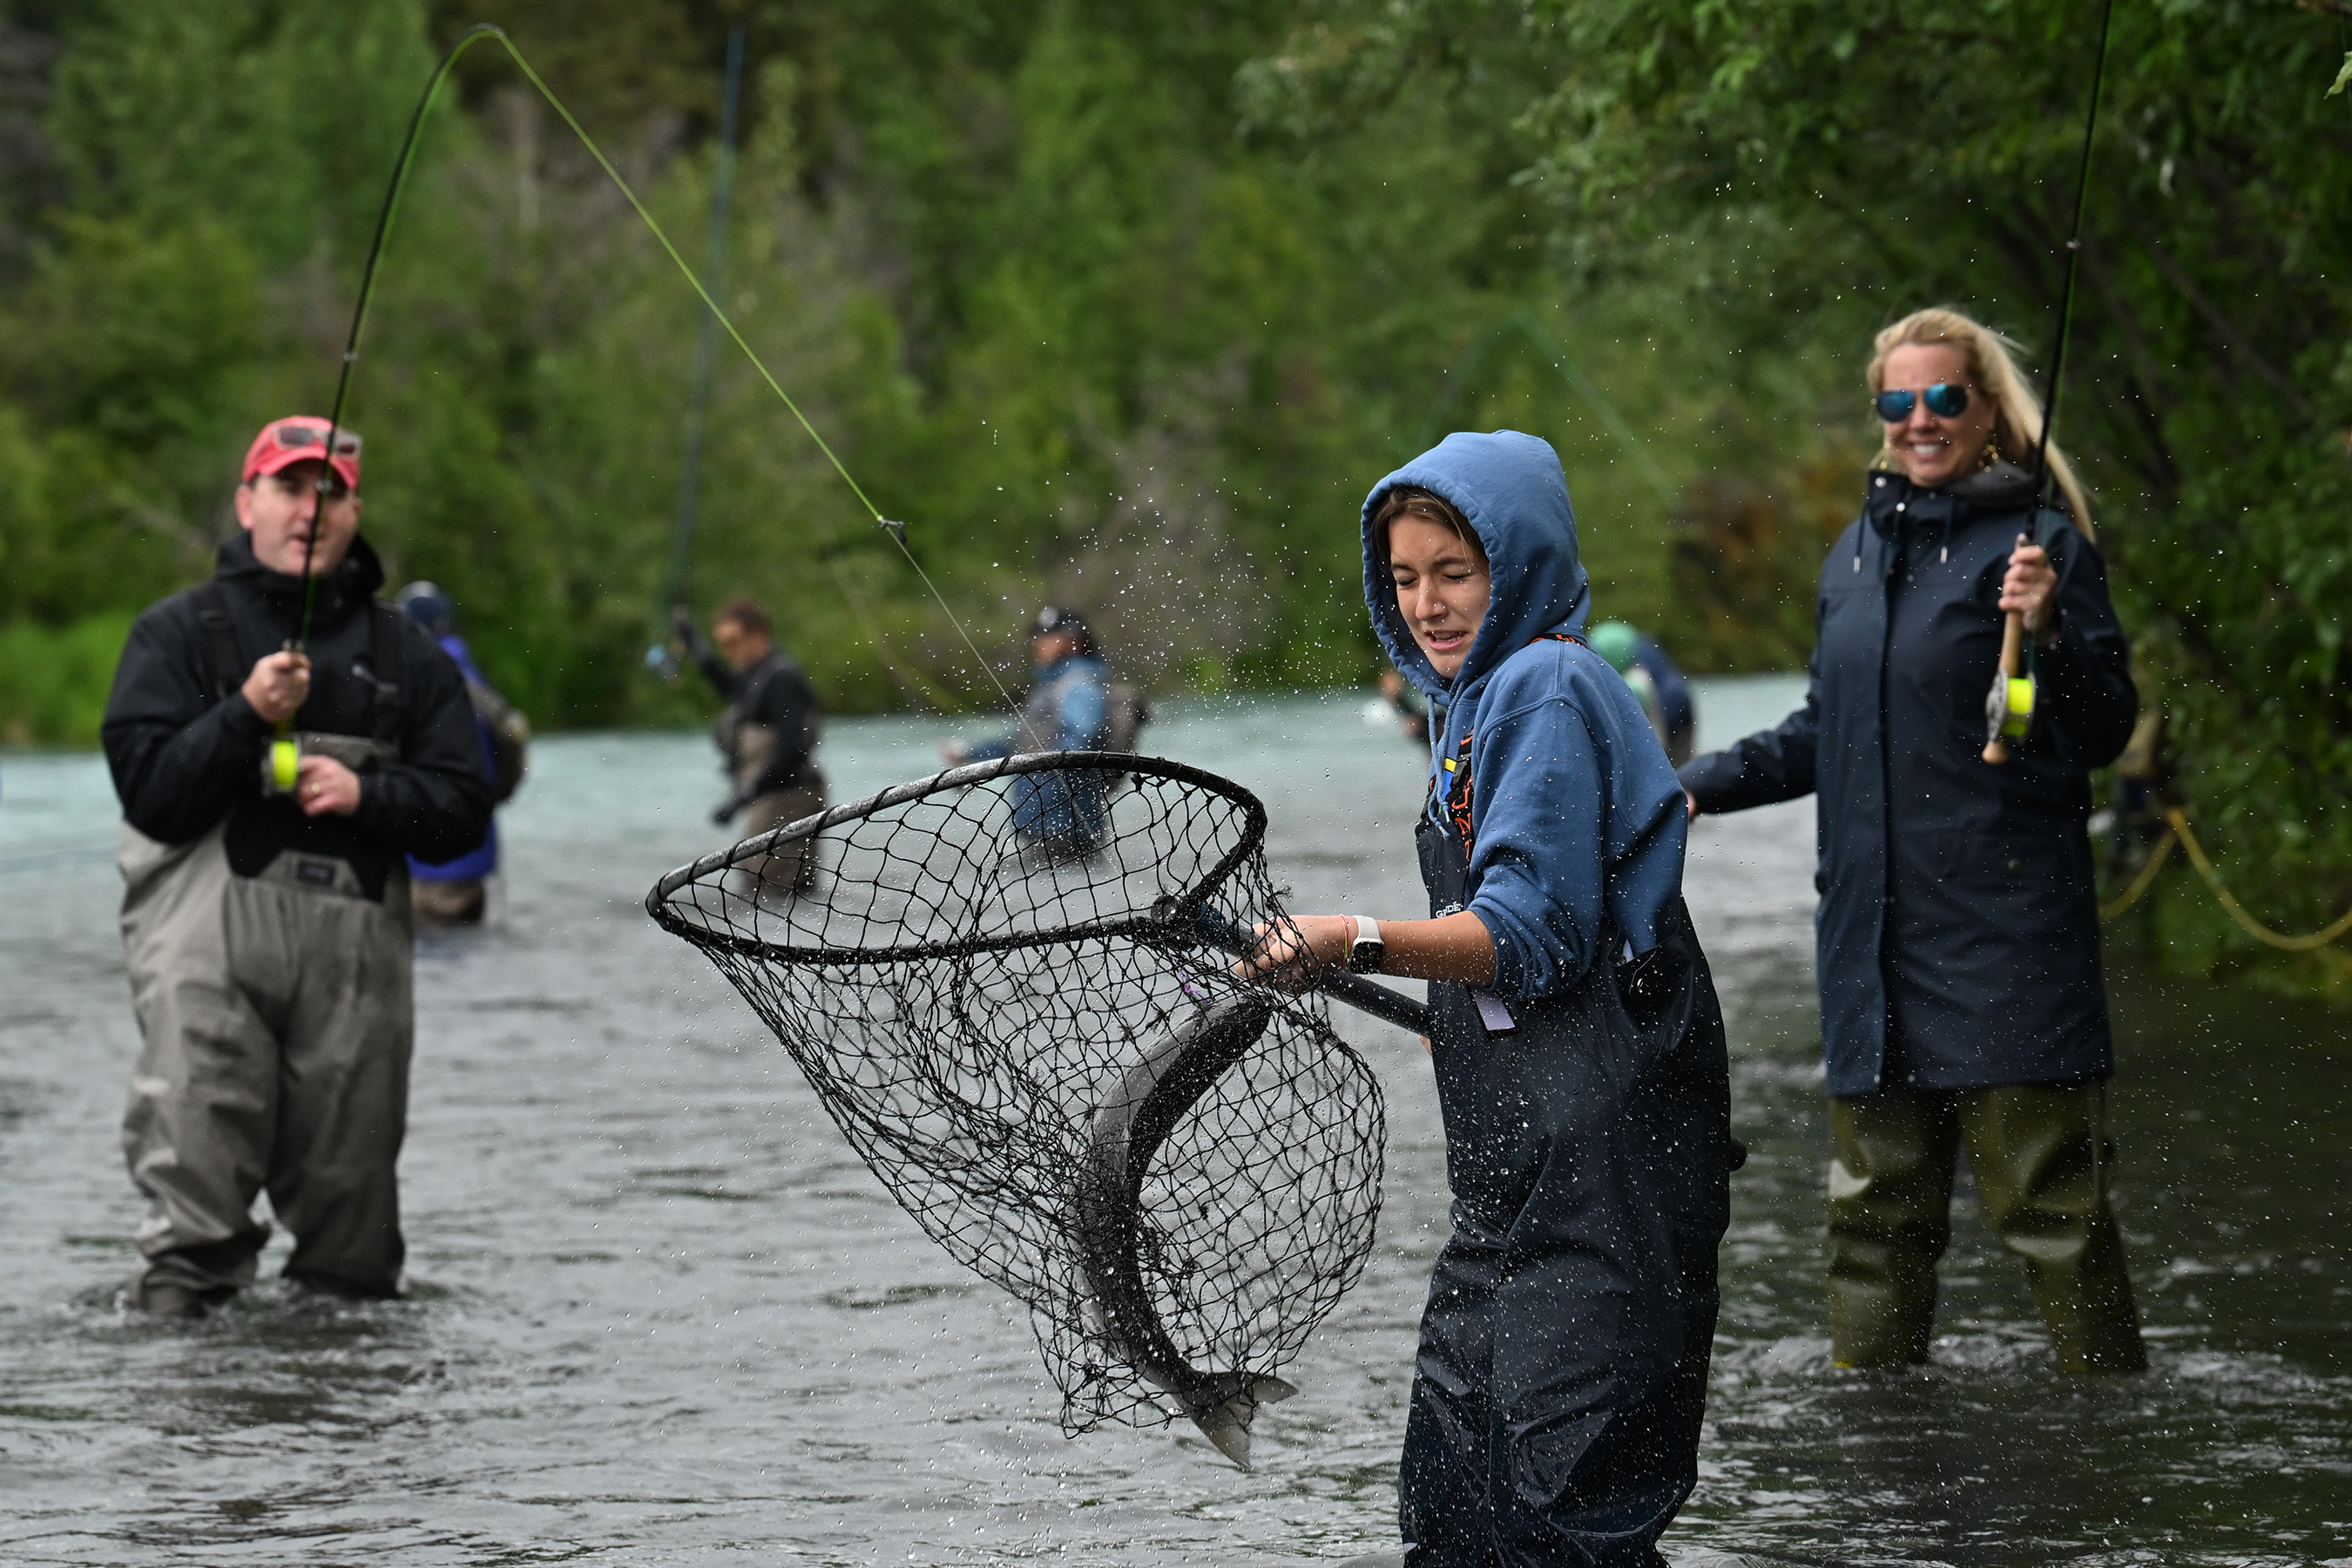 If you're catching fish, it's good fishing': Anglers hit the